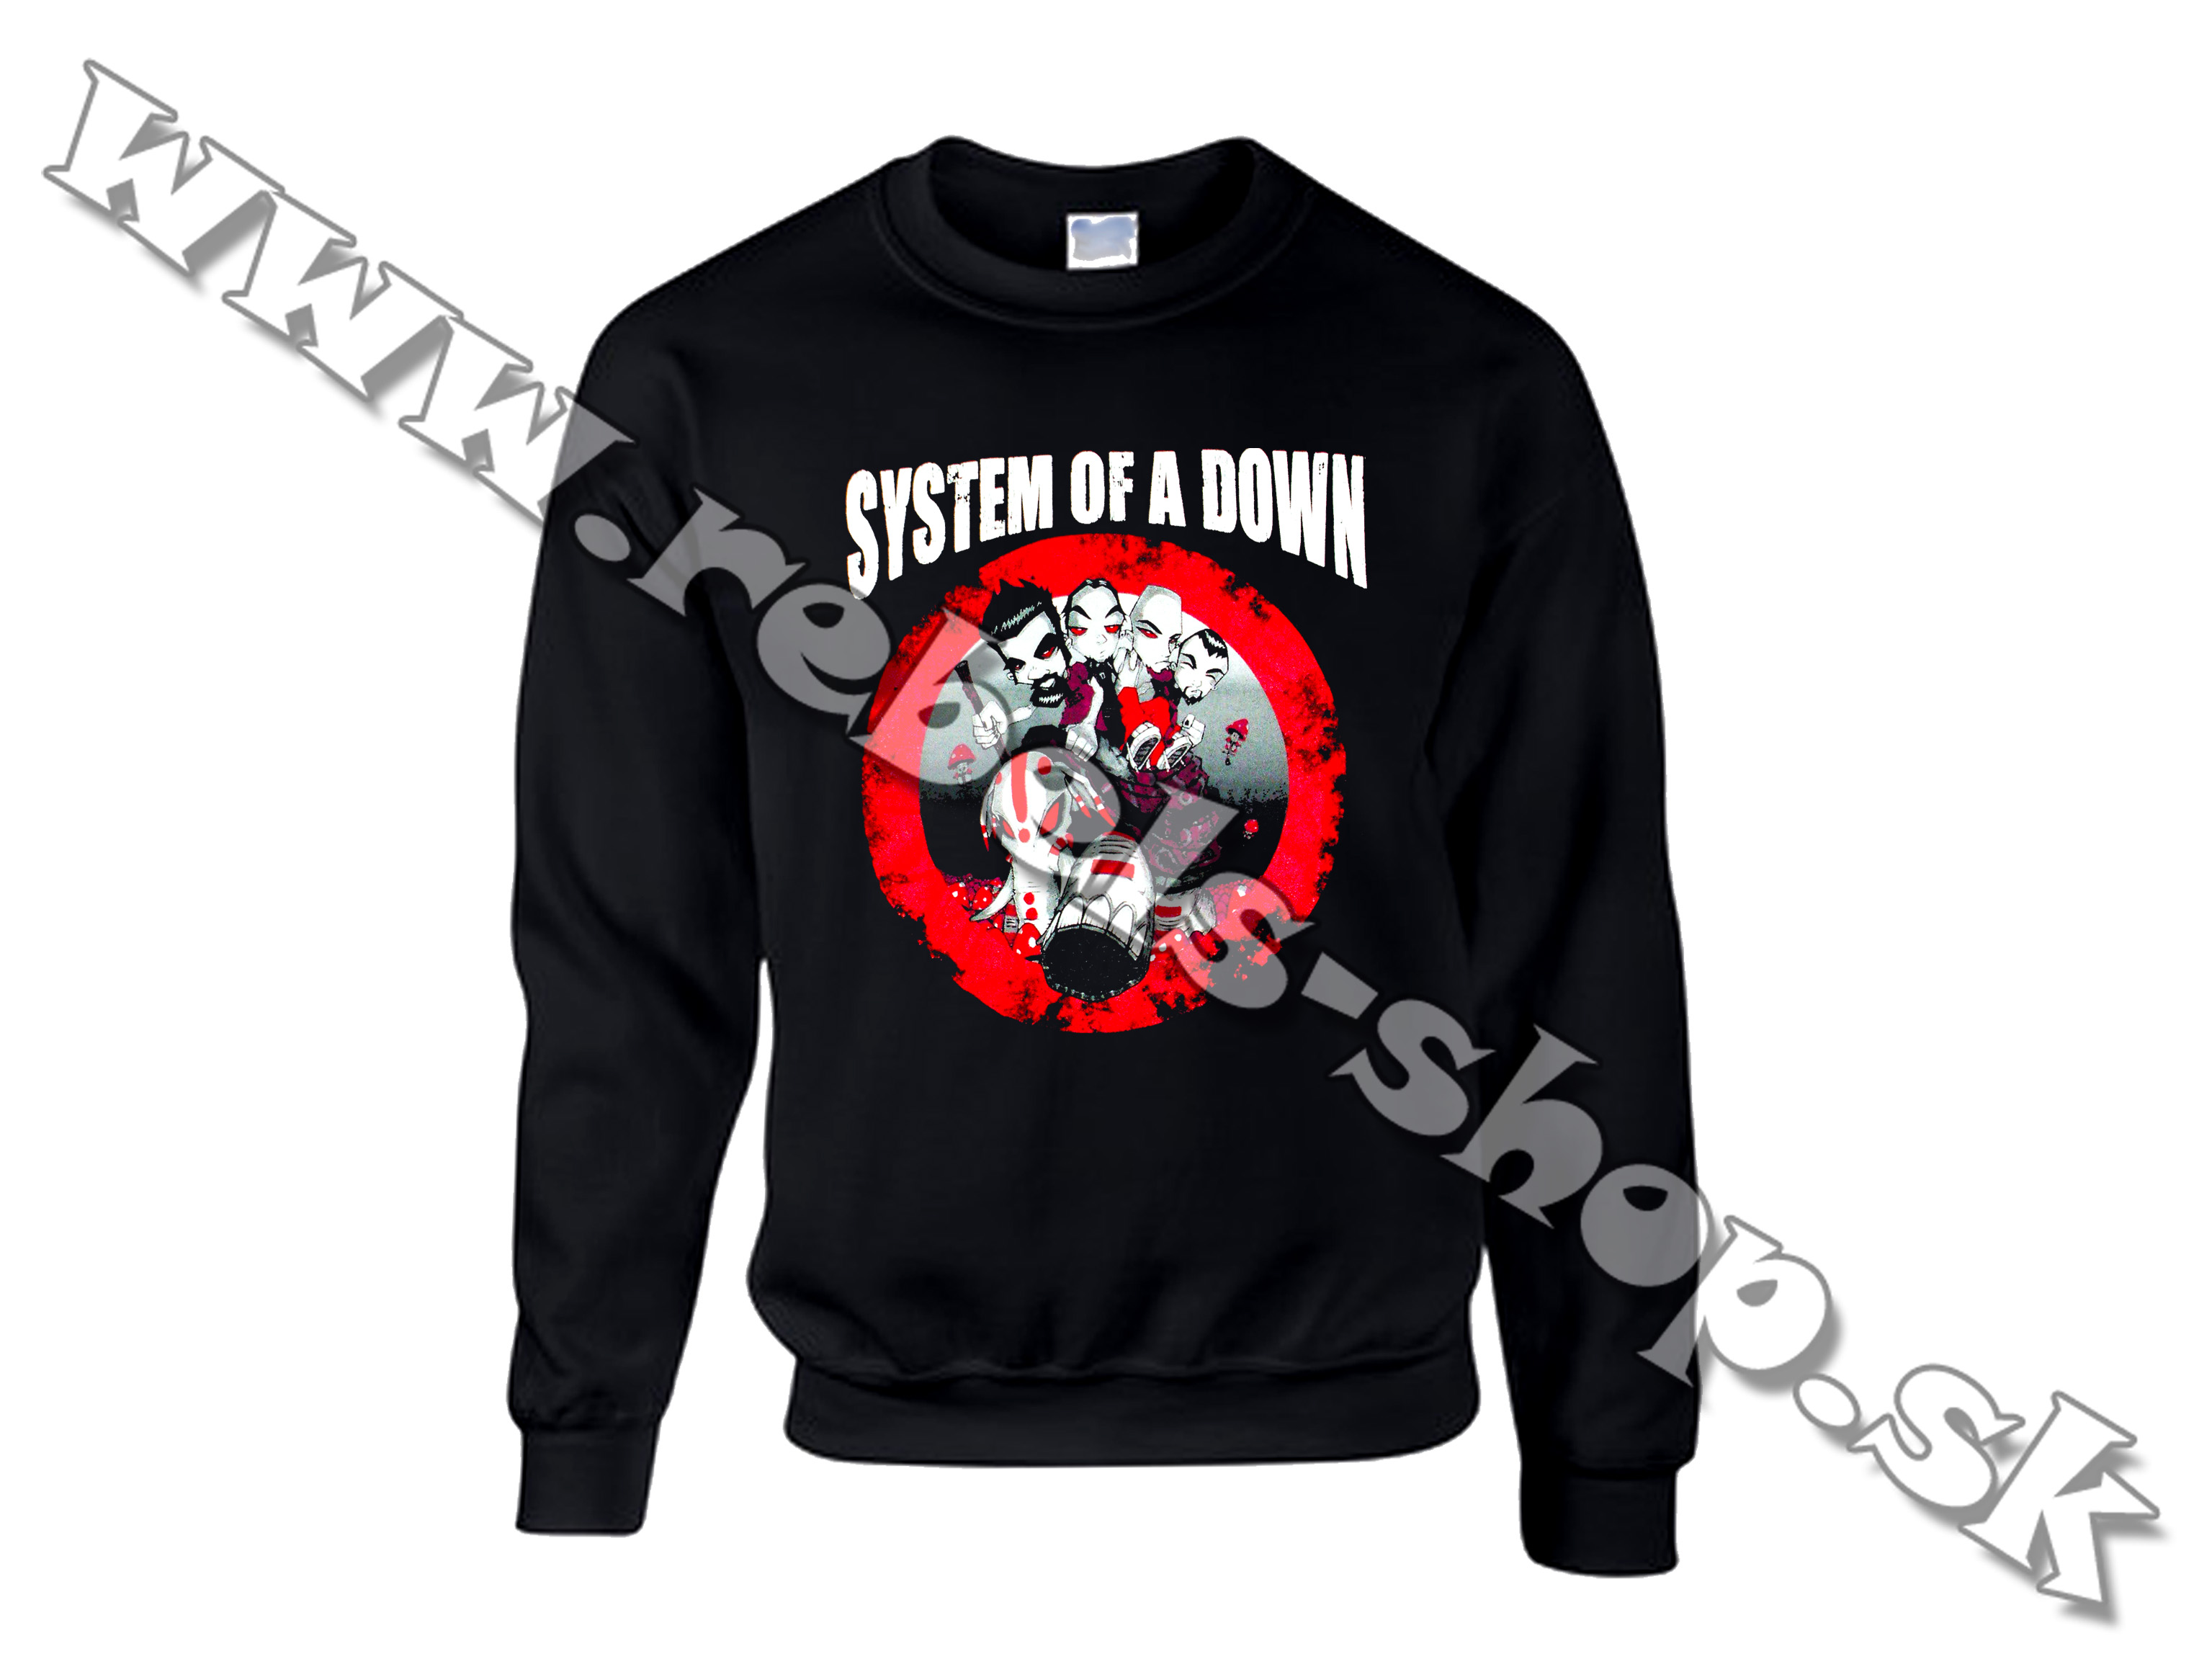 Mikina "System of a Down"